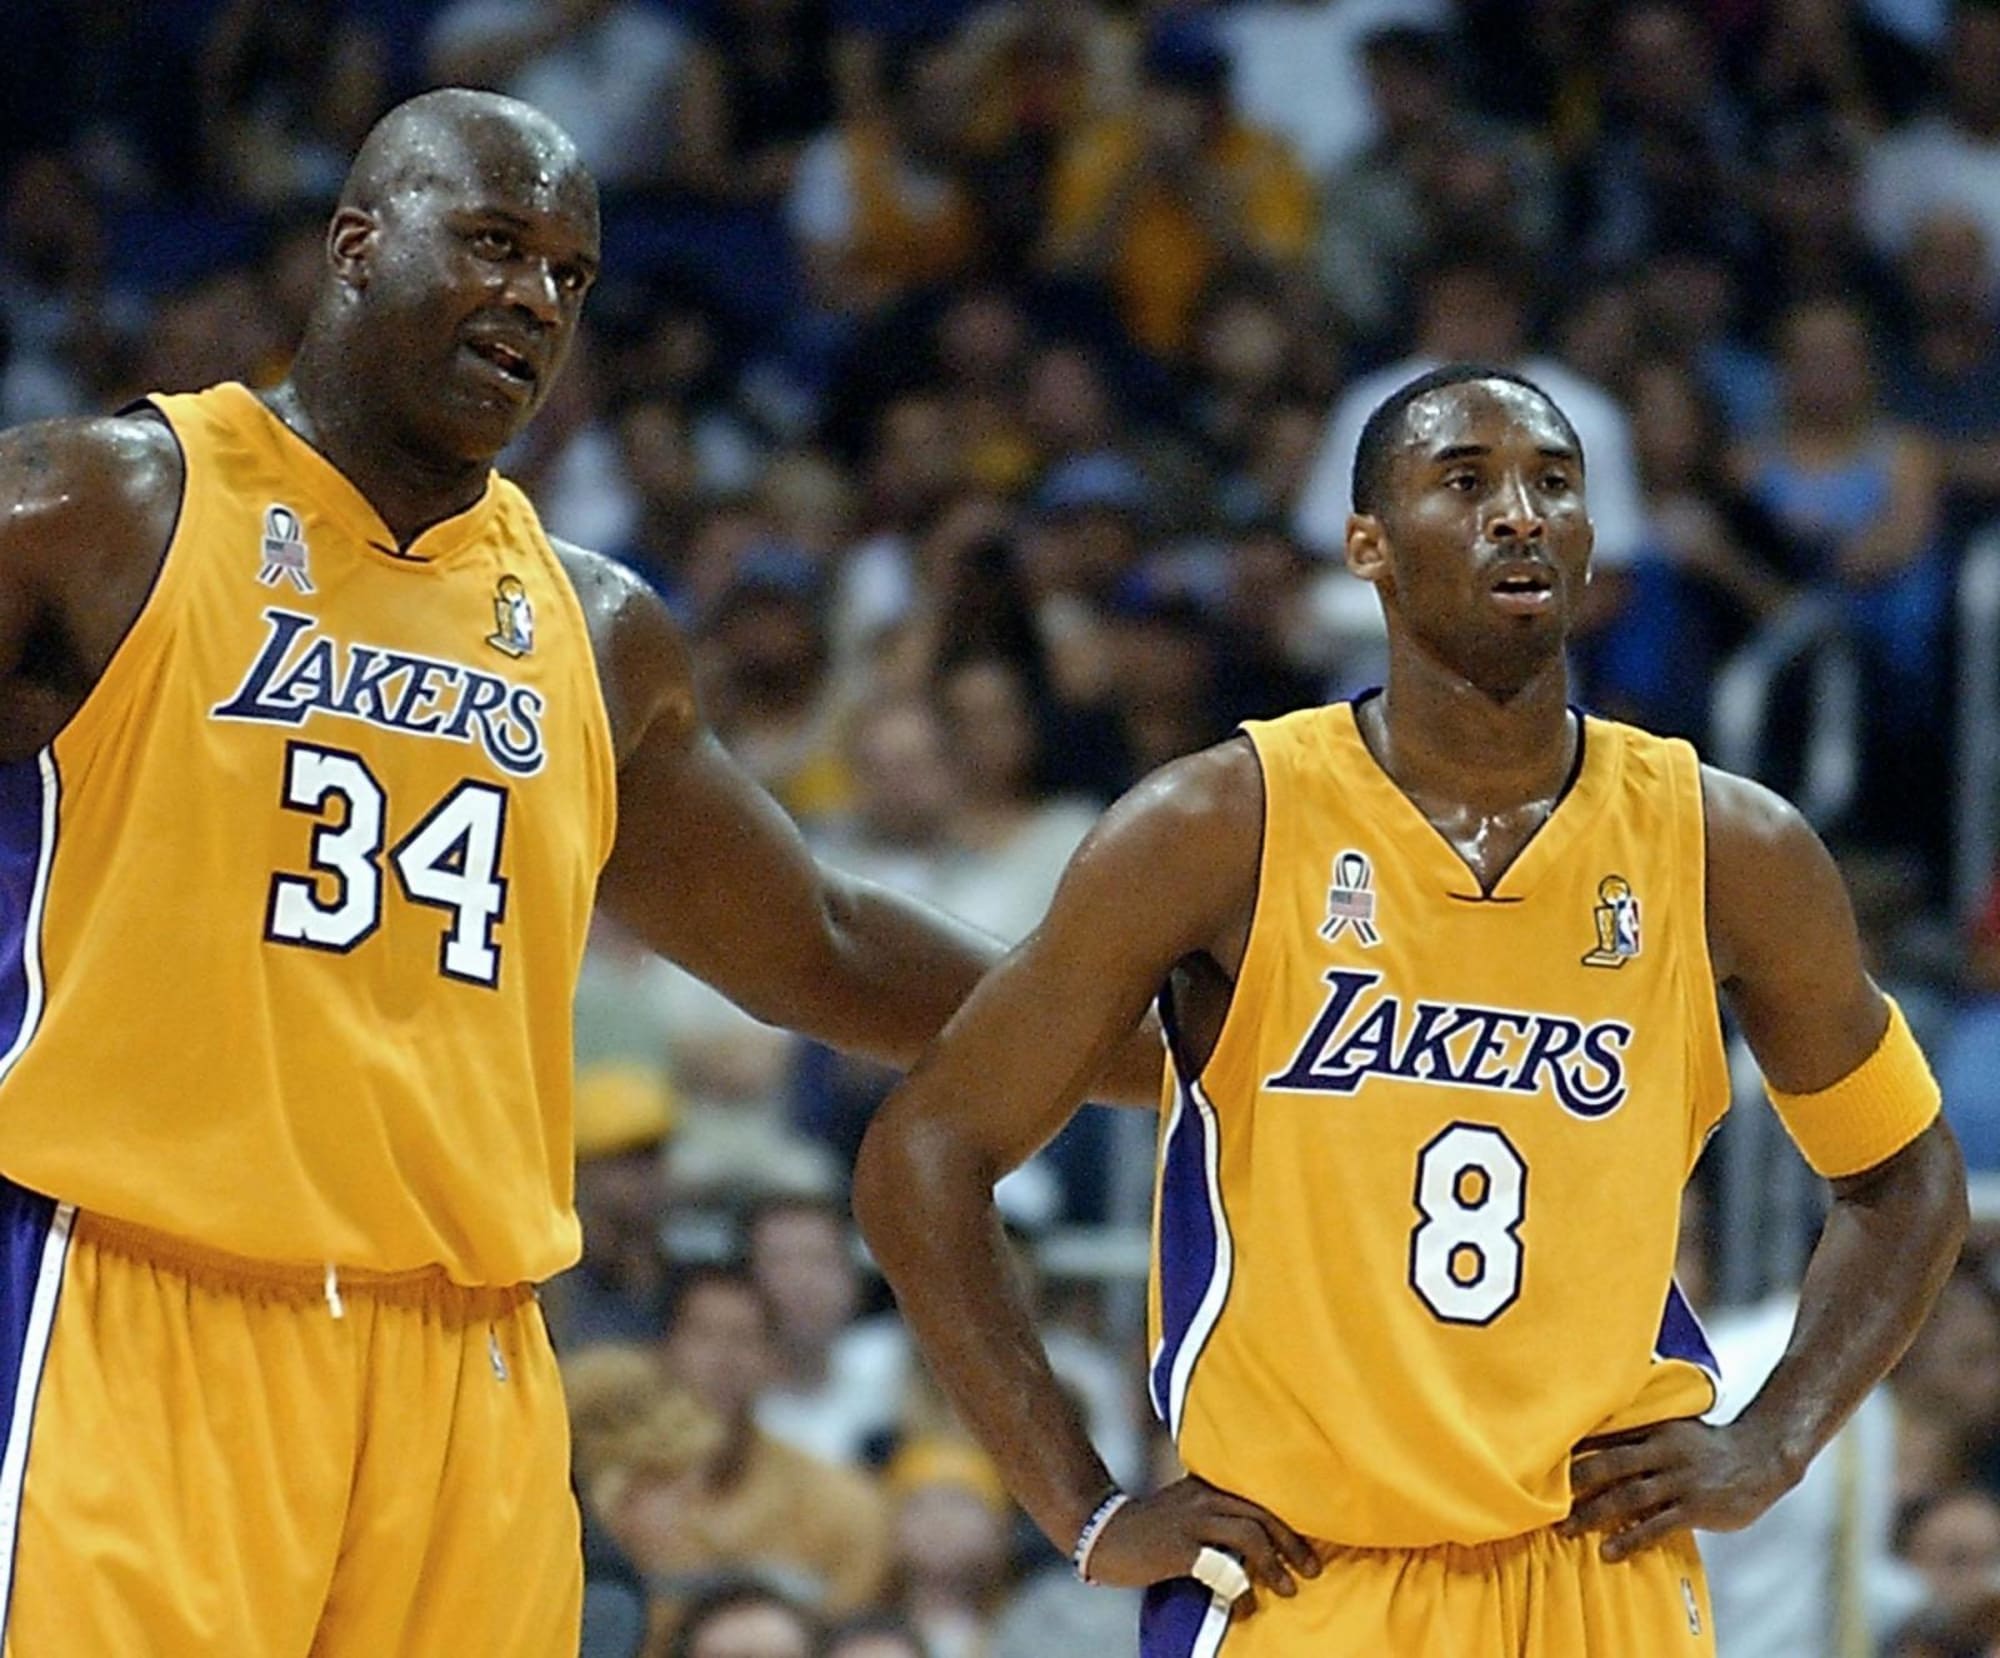 Shaquille O'Neal Once Wore Kobe Bryant's Number 8 Jersey - Playmaker HQ